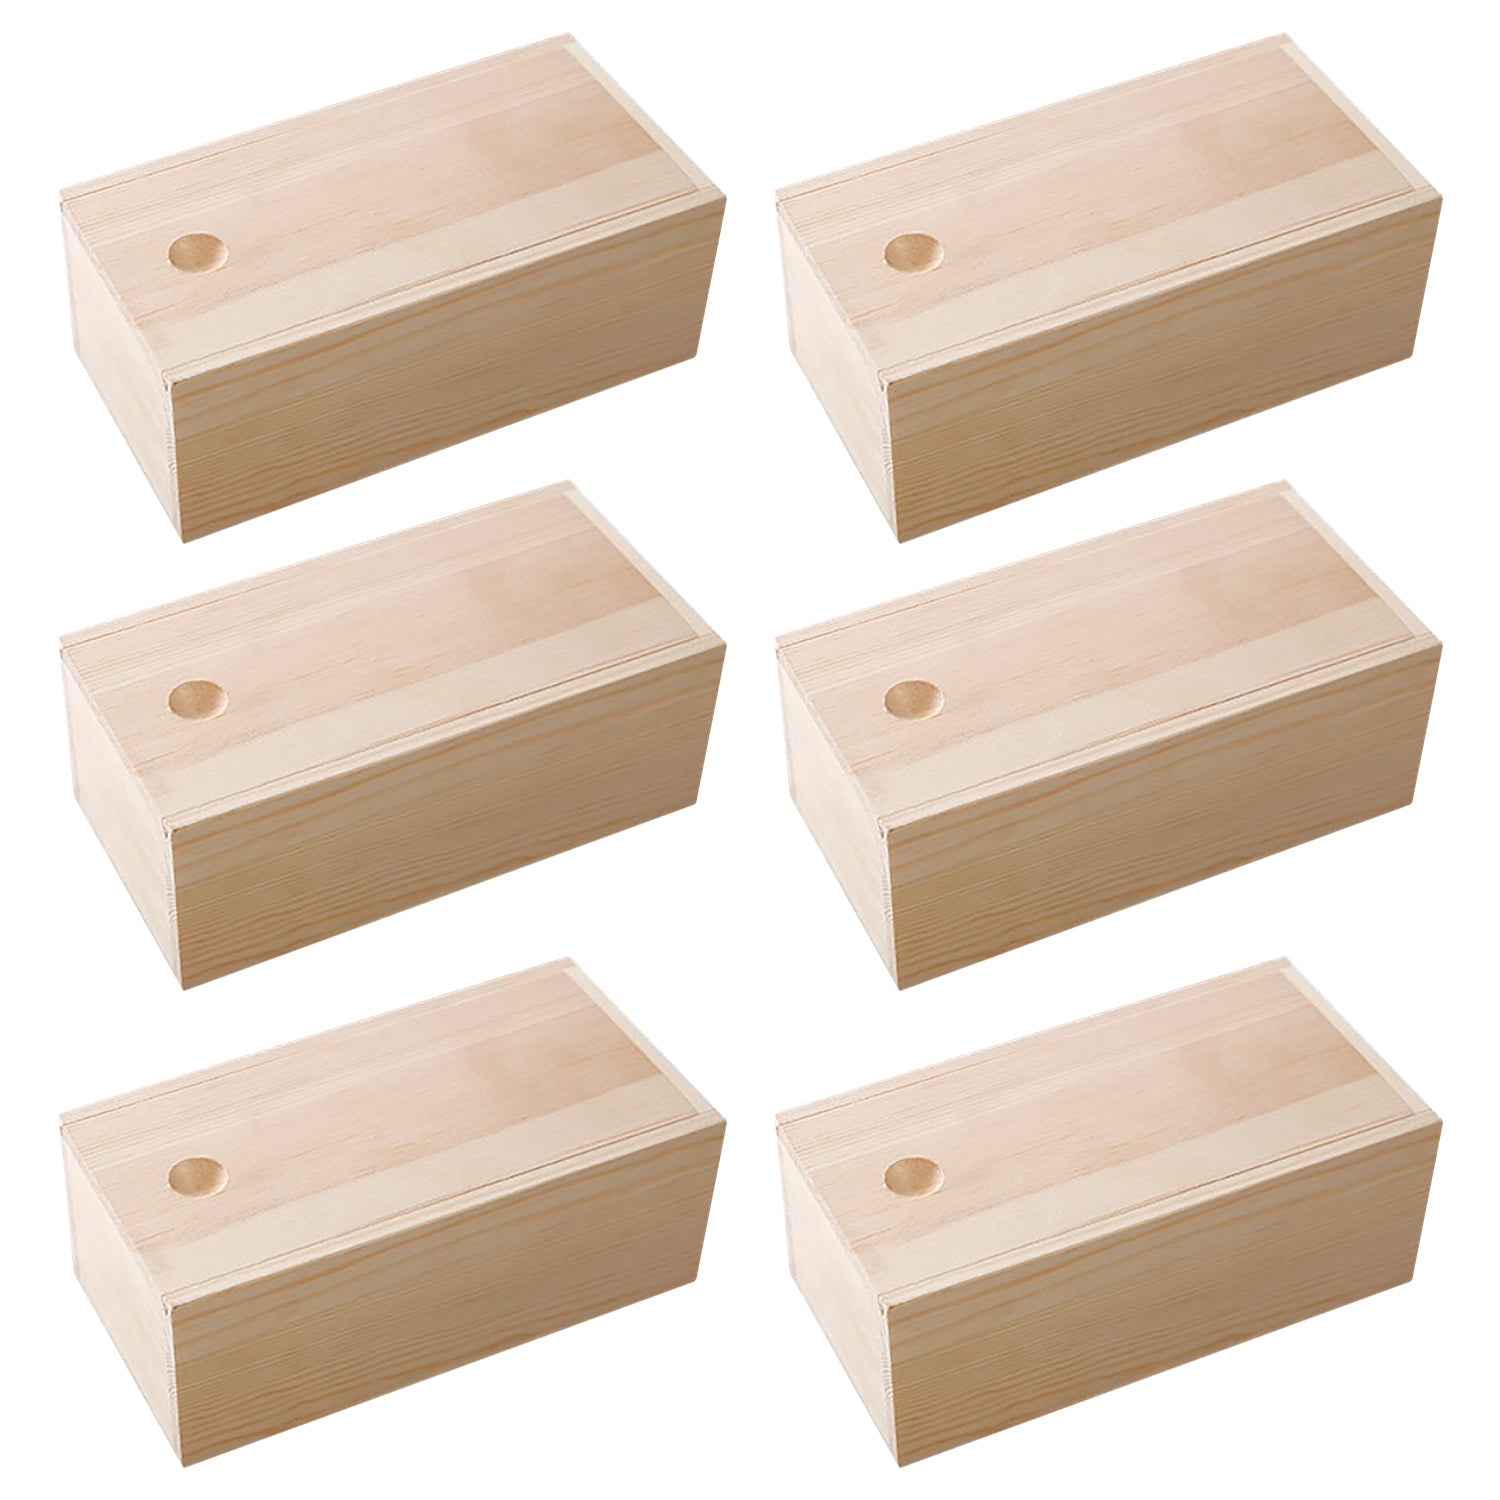 Load image into Gallery viewer, Natural Pine Wooden Box | Wood Storage Container with Sliding Lid